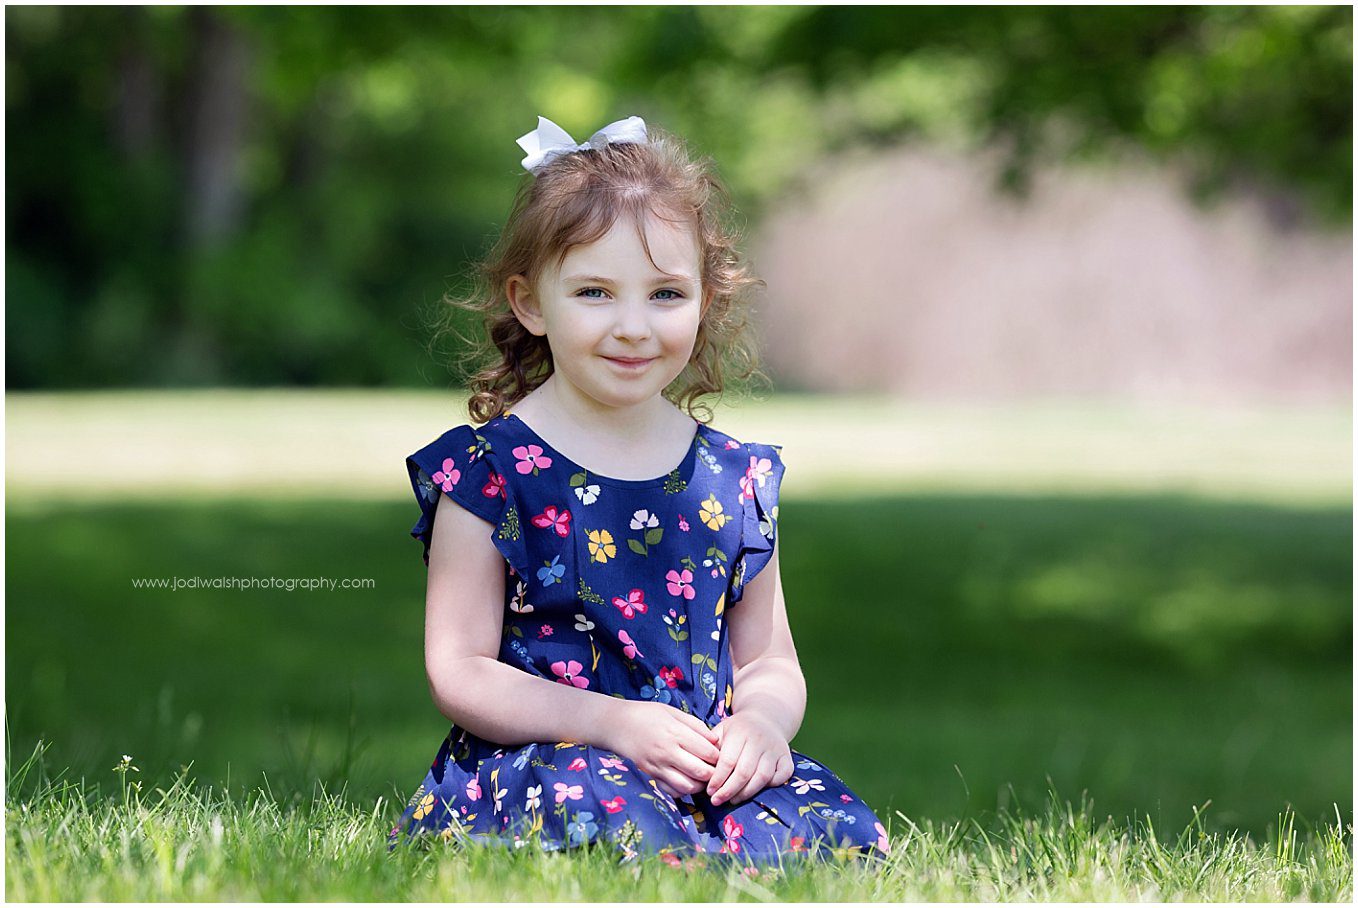 image of a little girl wearing a navy blue dress with flowers on it. She's sitting in the grass by a shade tree and has her hands in her lap. 